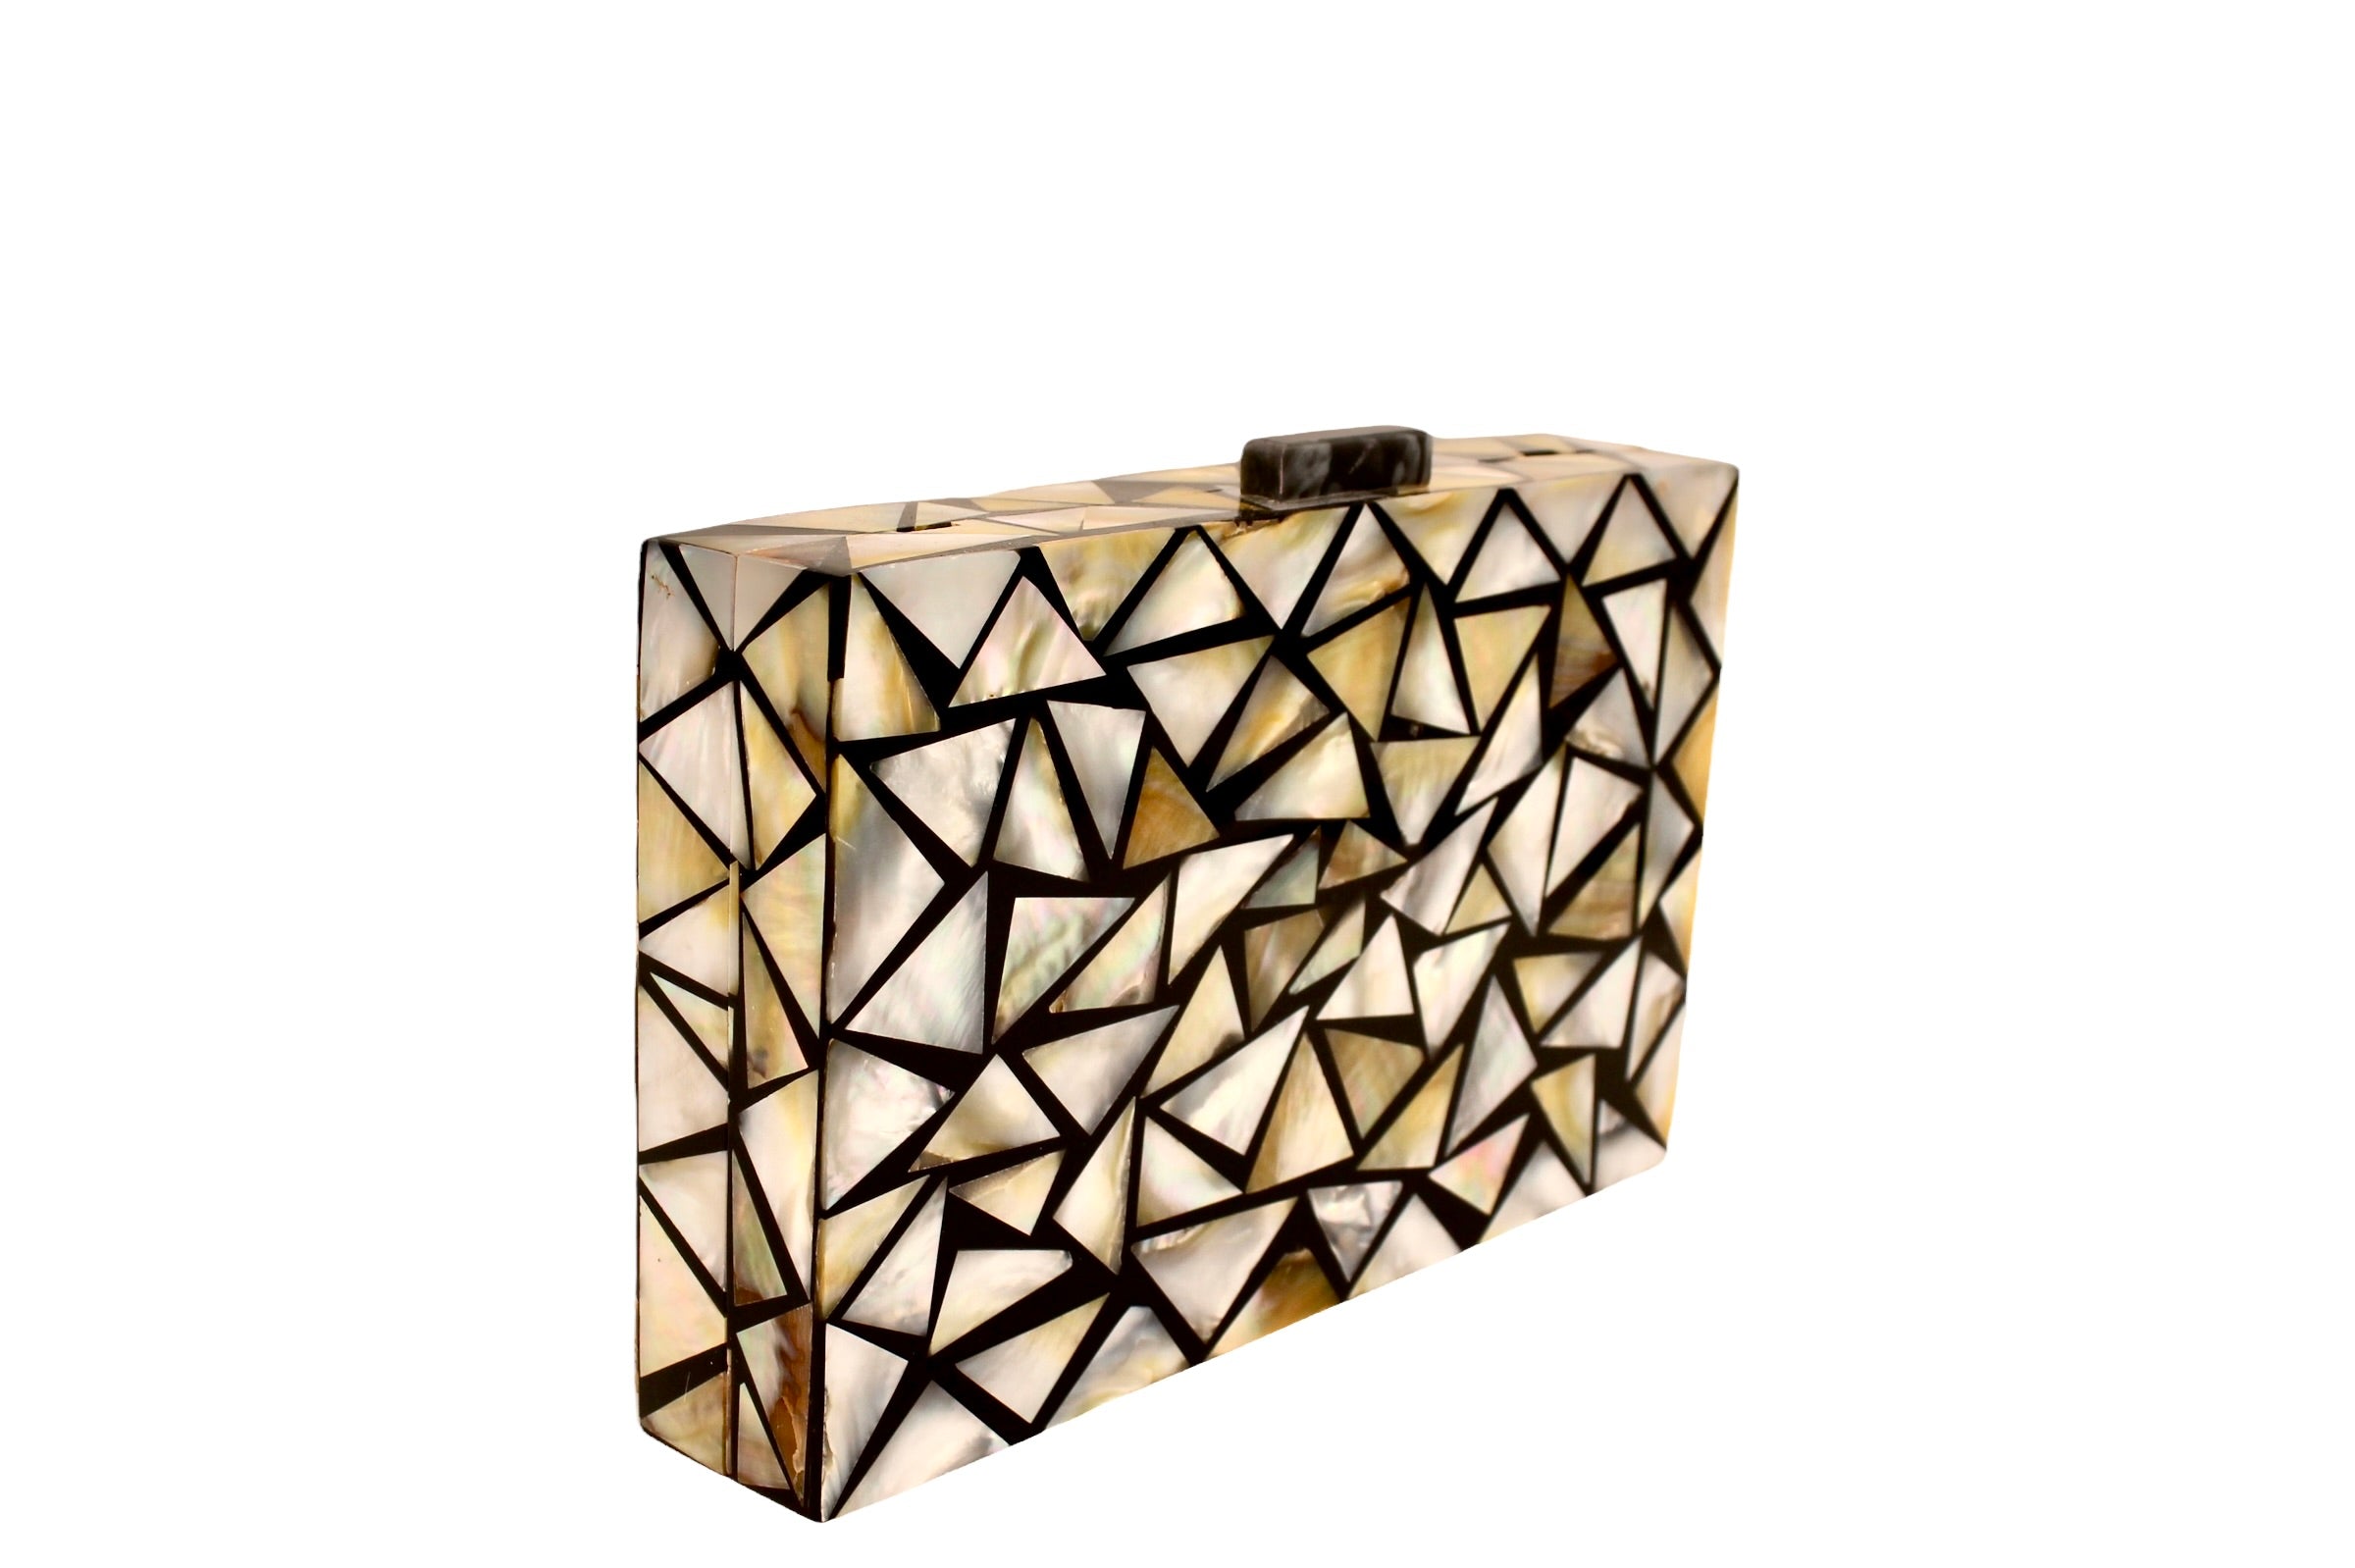 Number 3028: ANDRINA Clutch